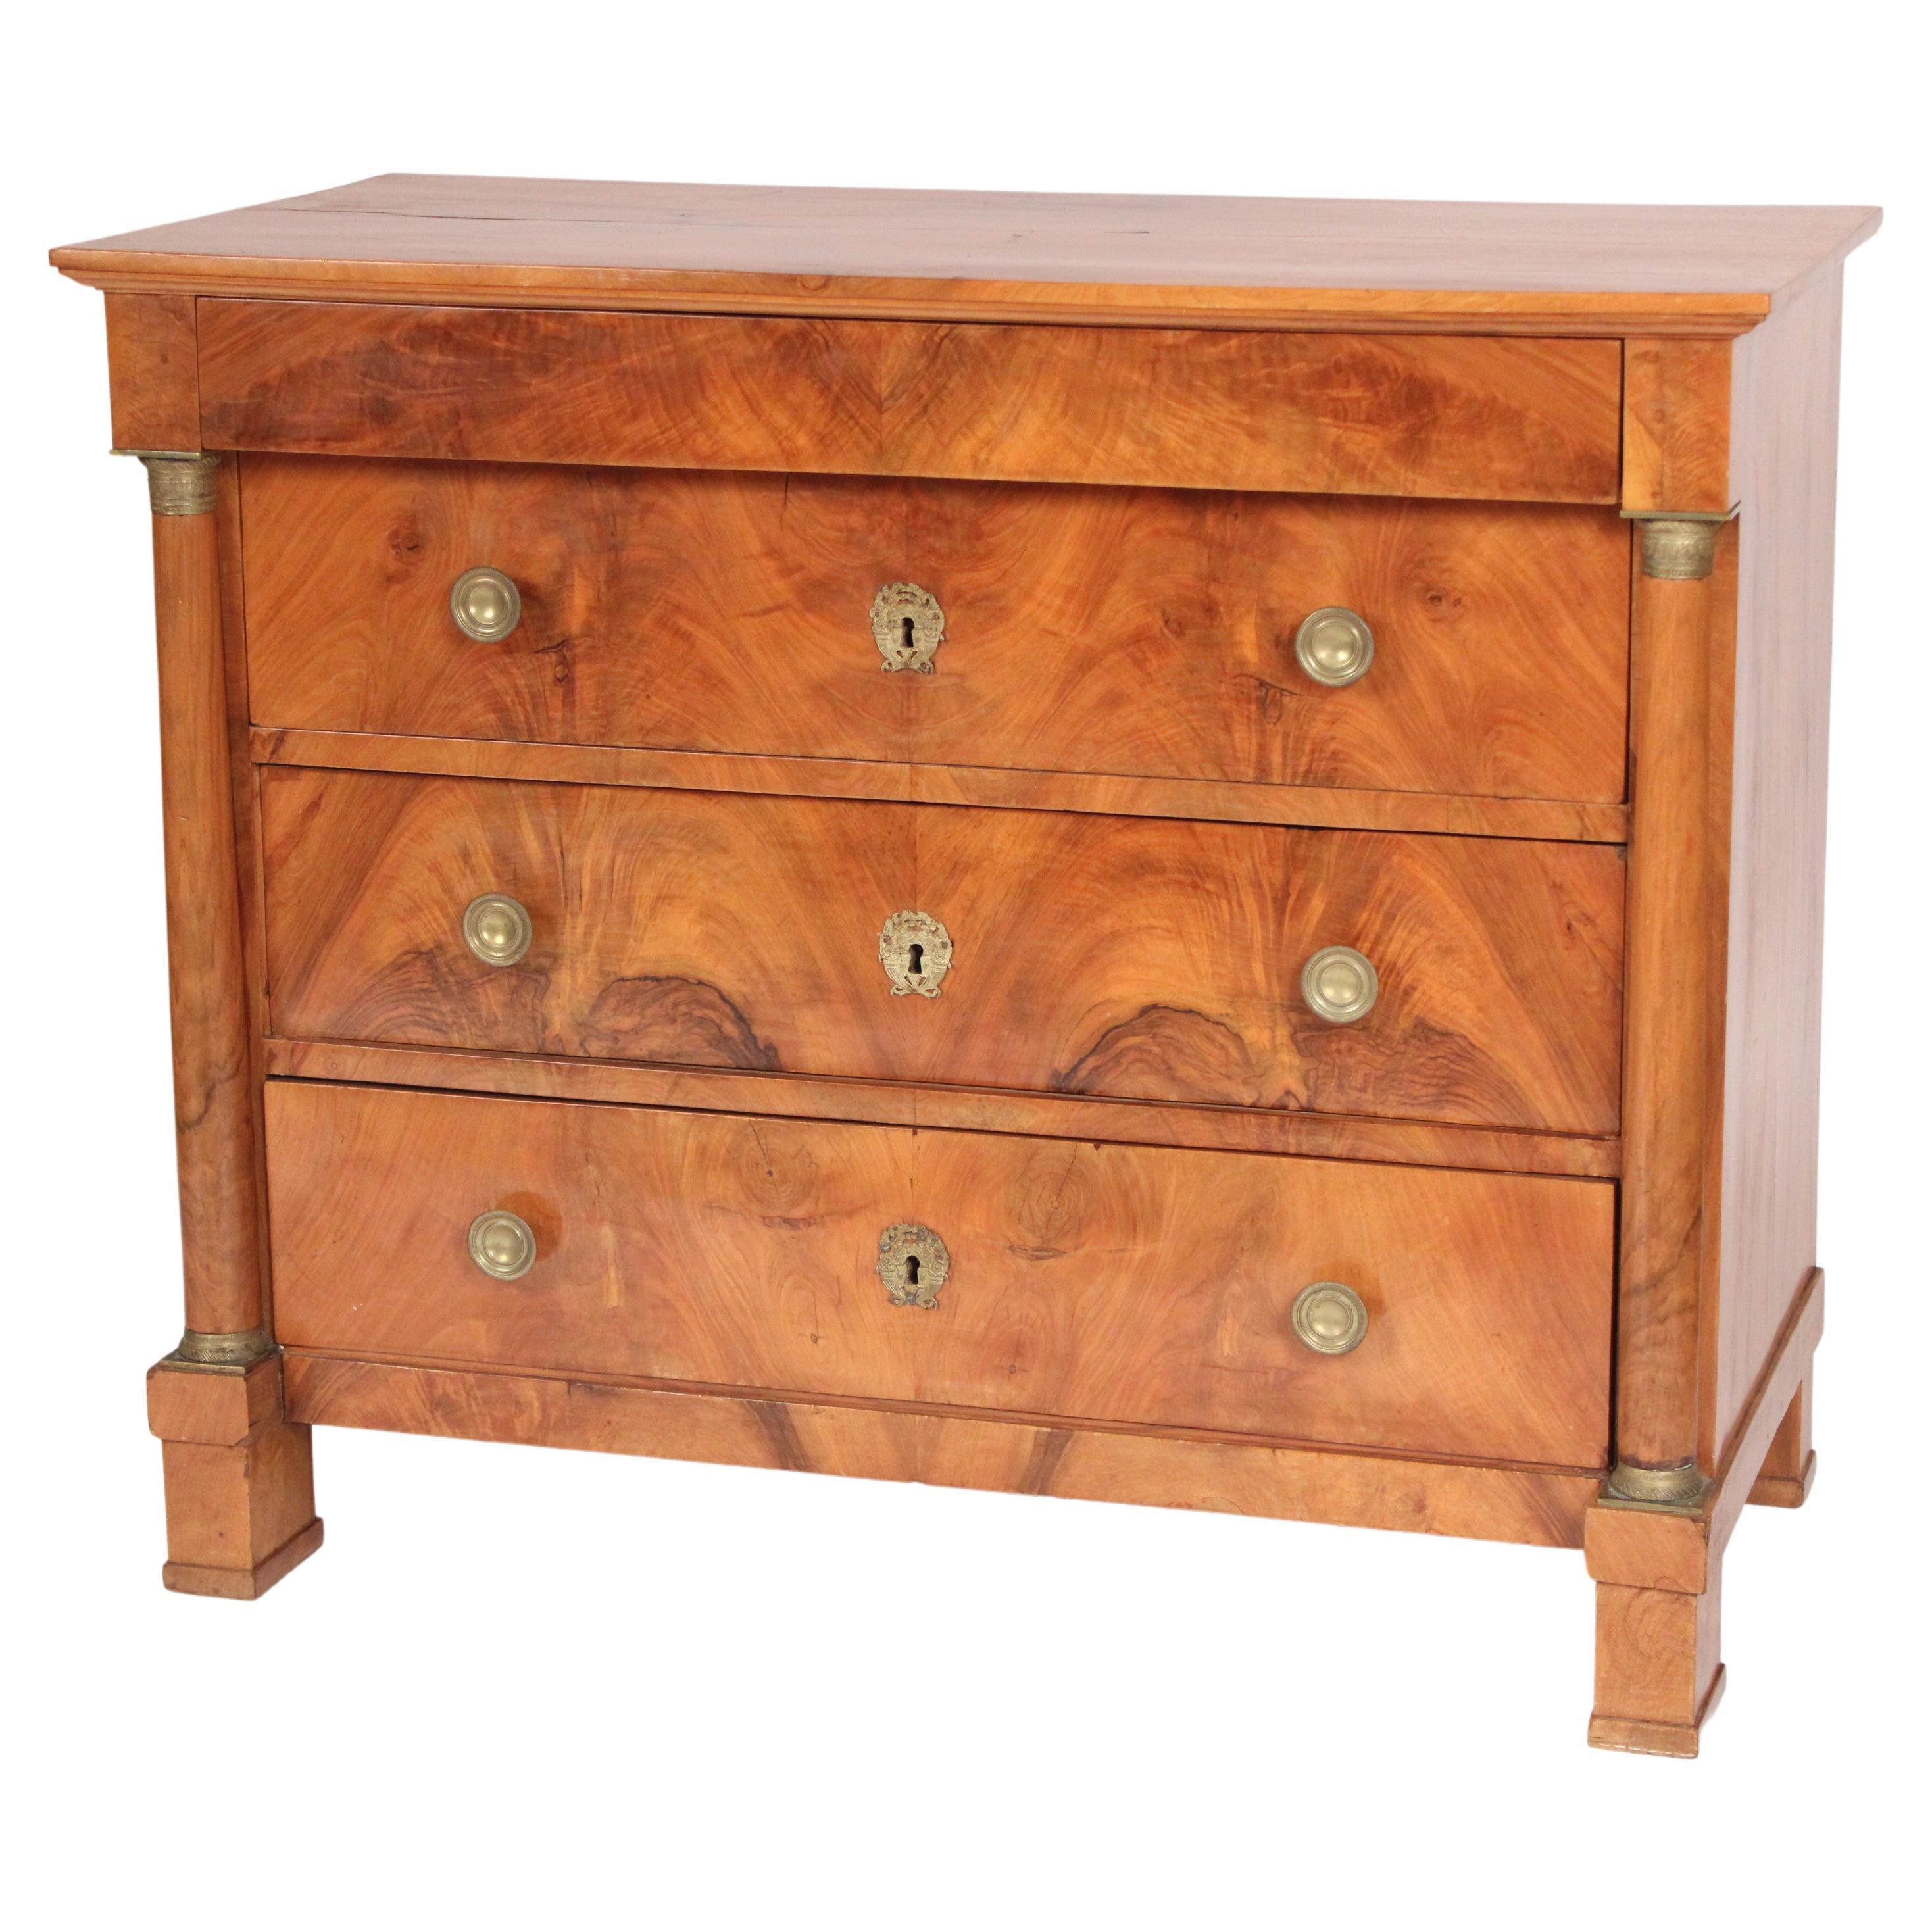 Antique Empire Style Burl Walnut Chest Of Drawers For Sale